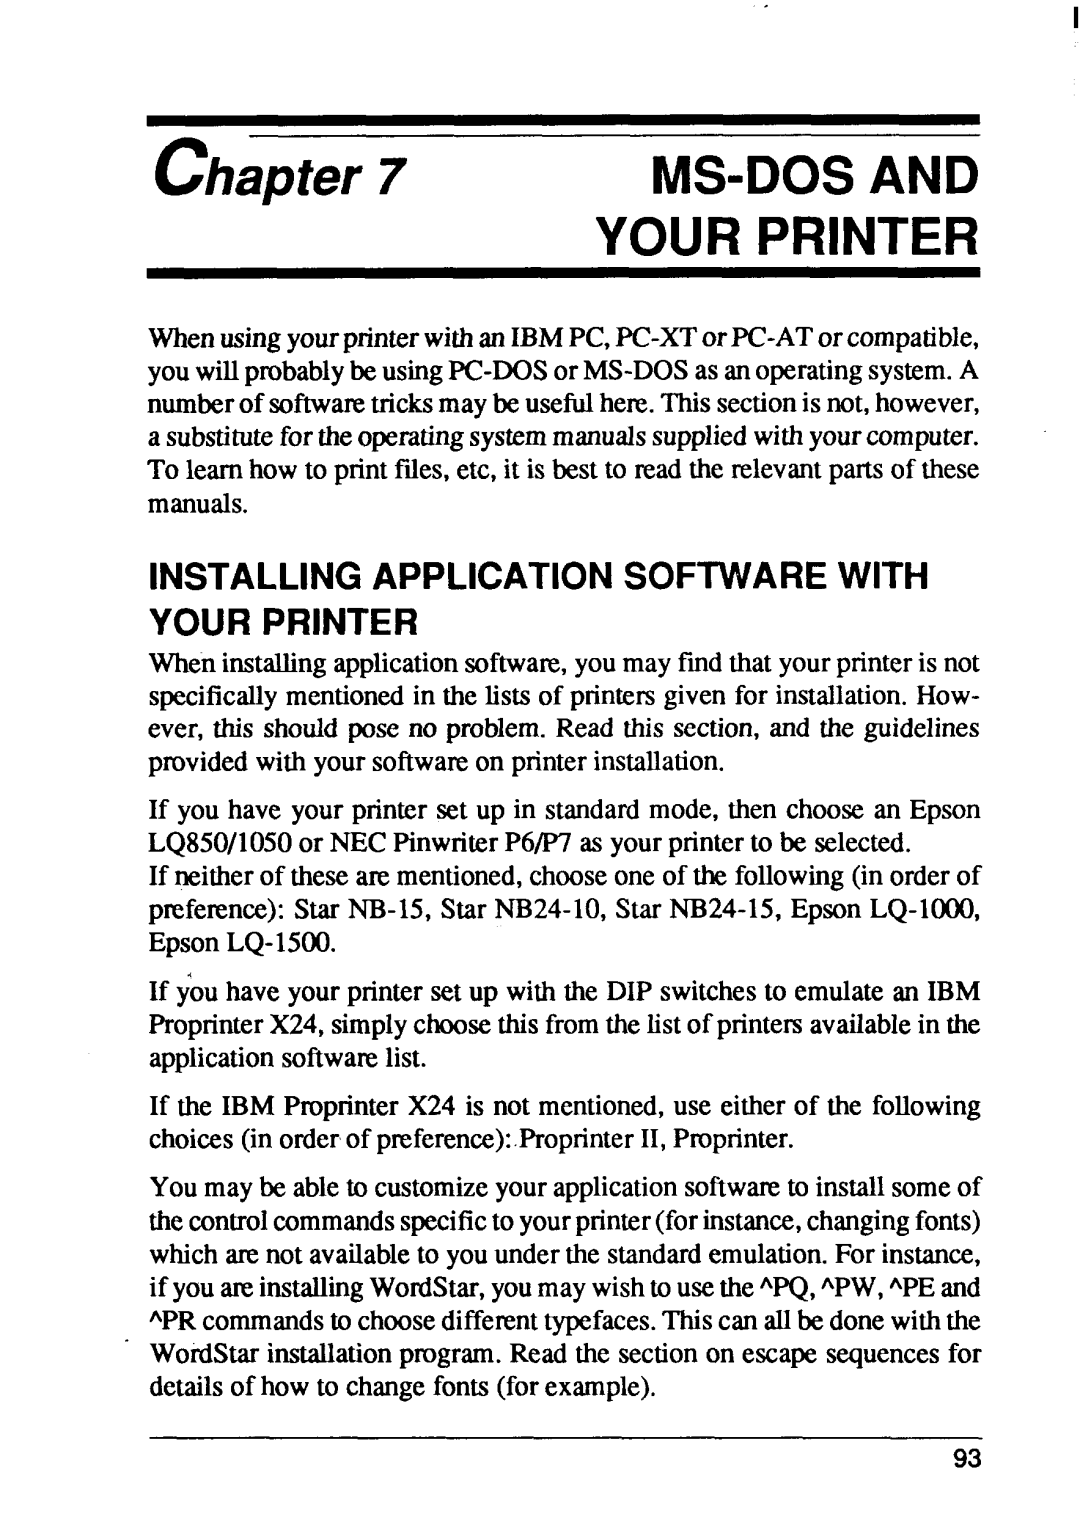 Star Micronics XB24-15, XB24-10 user manual Ms-Dos And, Installing Application Software With Your Printer, chapter 